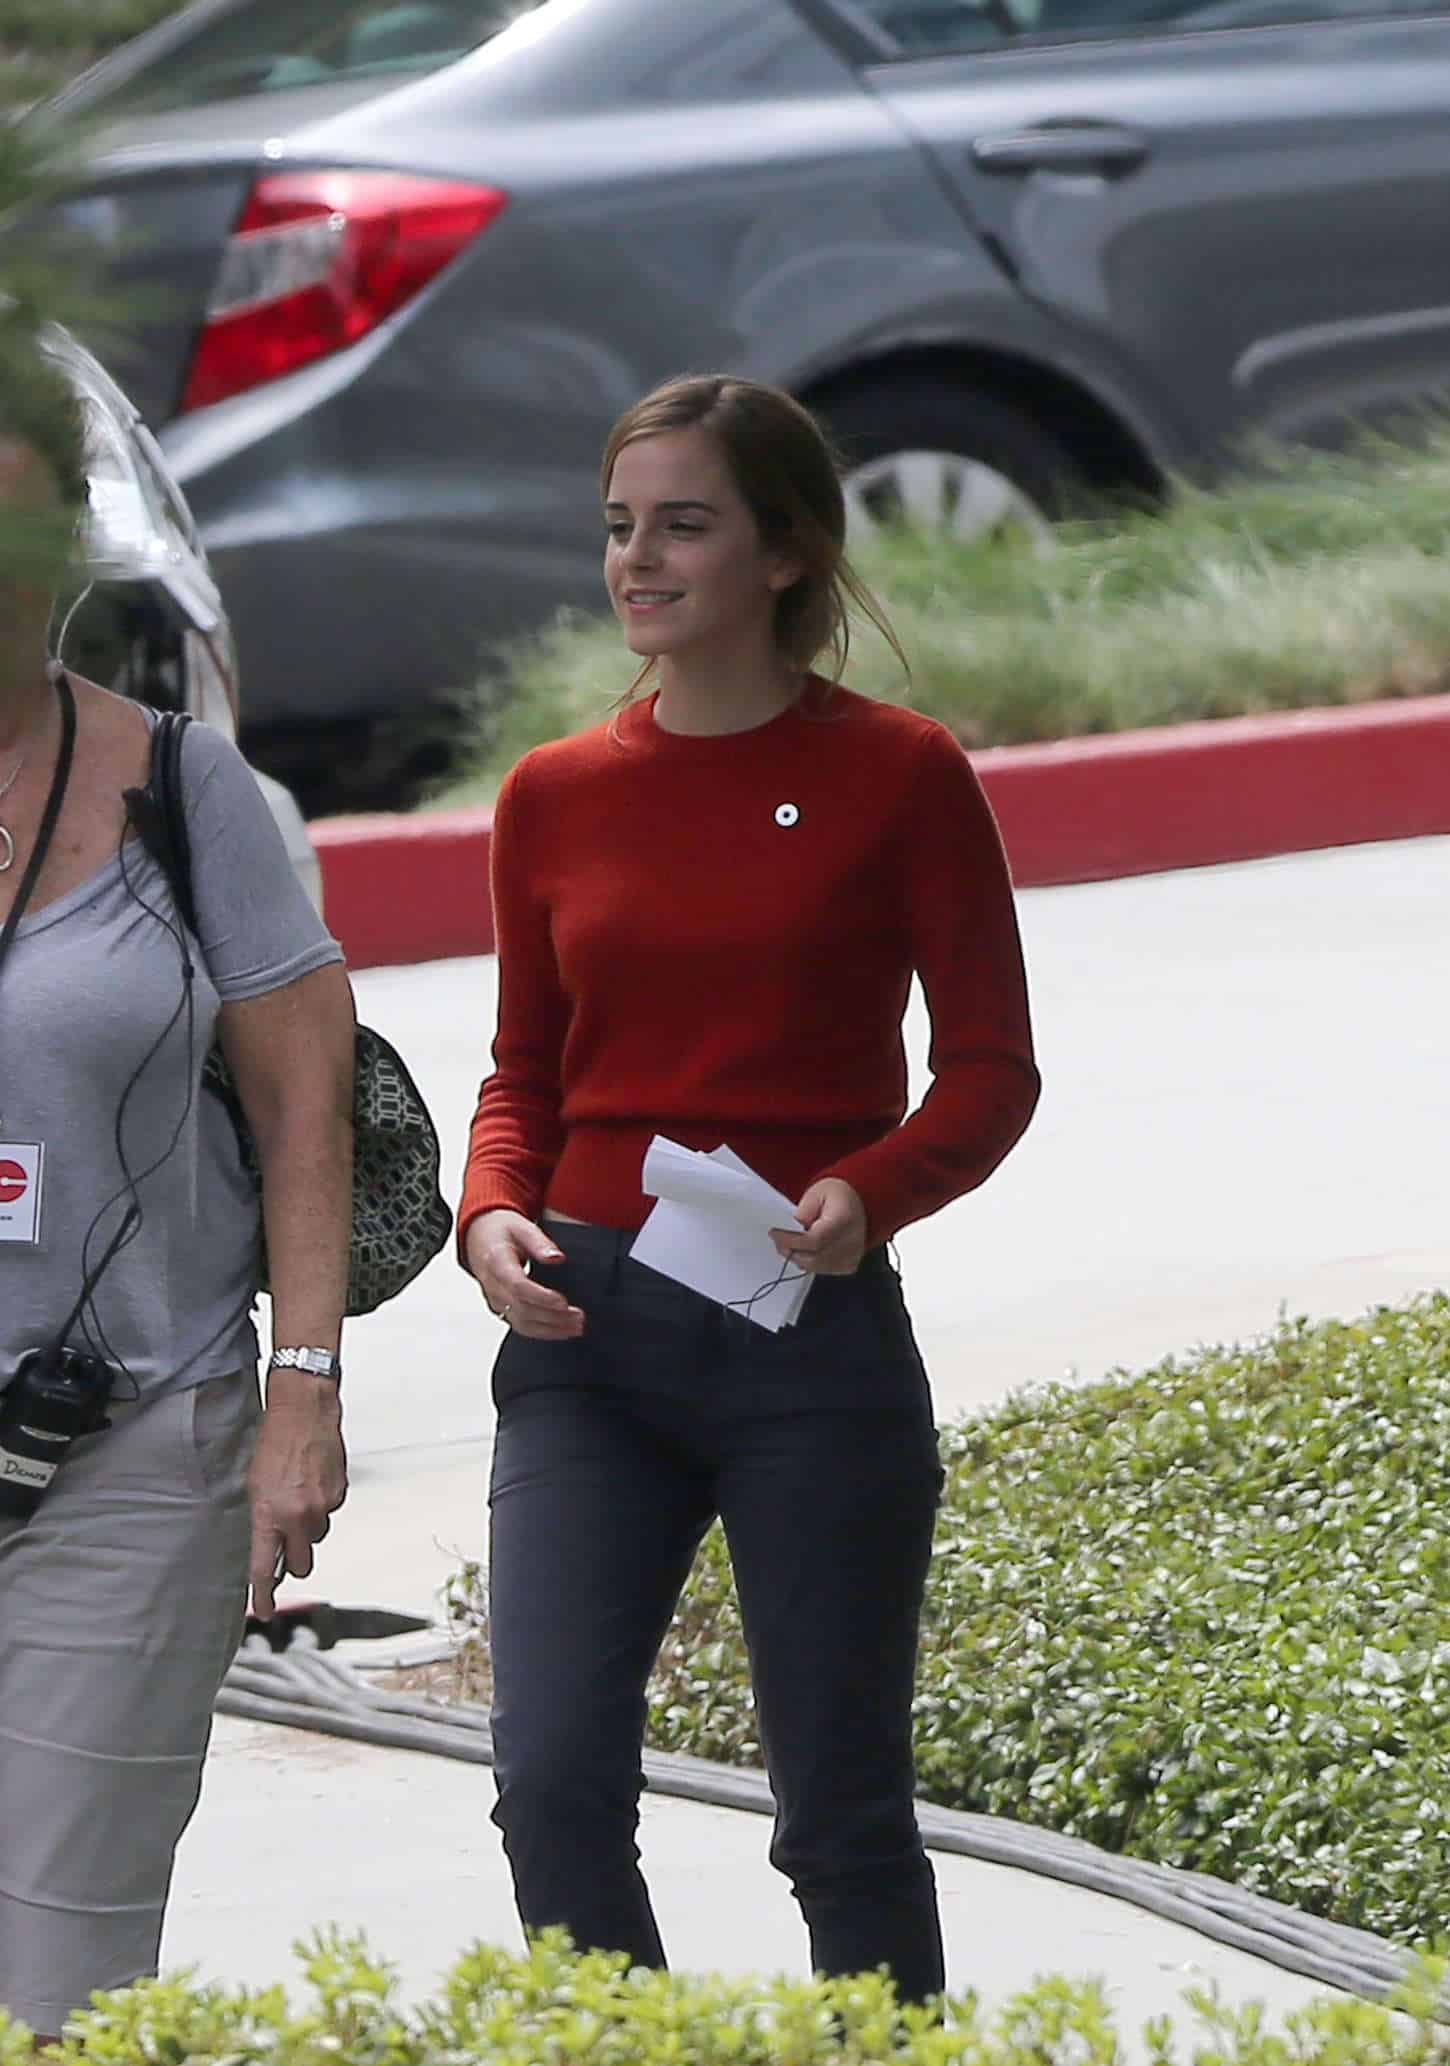 Emma Watson Looked Incredibly Beautiful on the Set of “The Circle” in LA